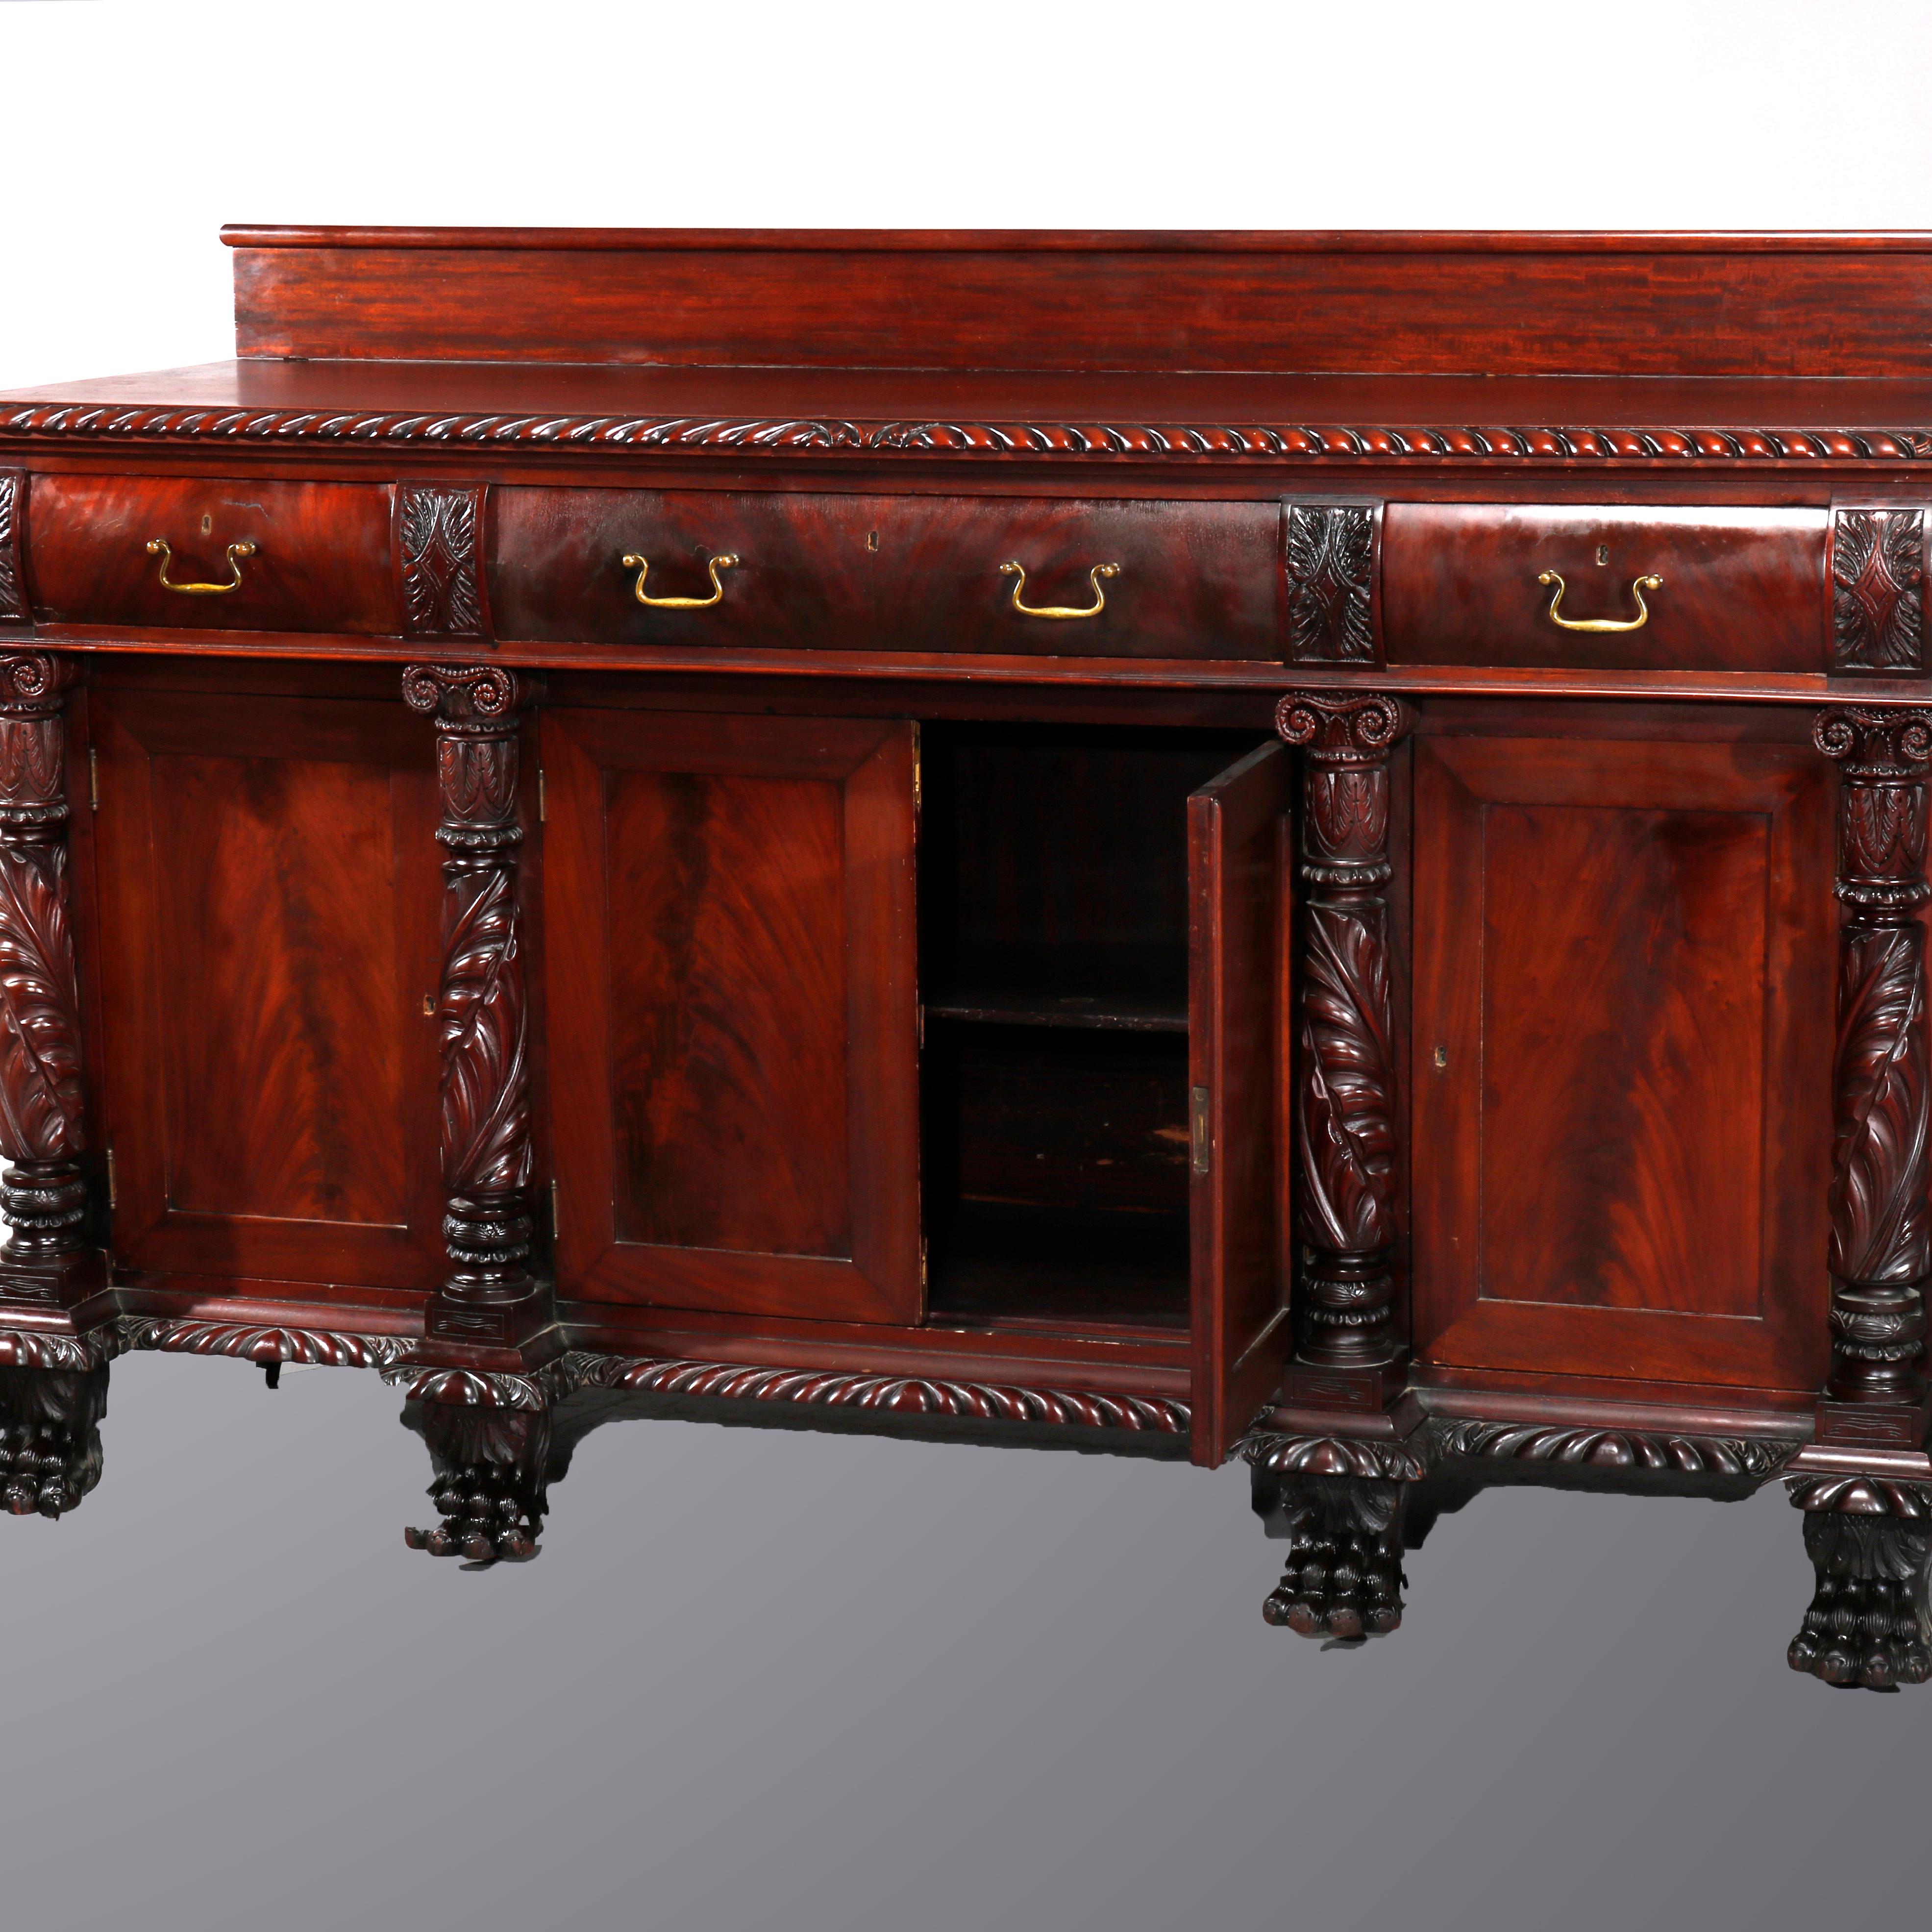 Antique American Empire Carved Mahogany Clawfoot Sideboard, 19th Century 11